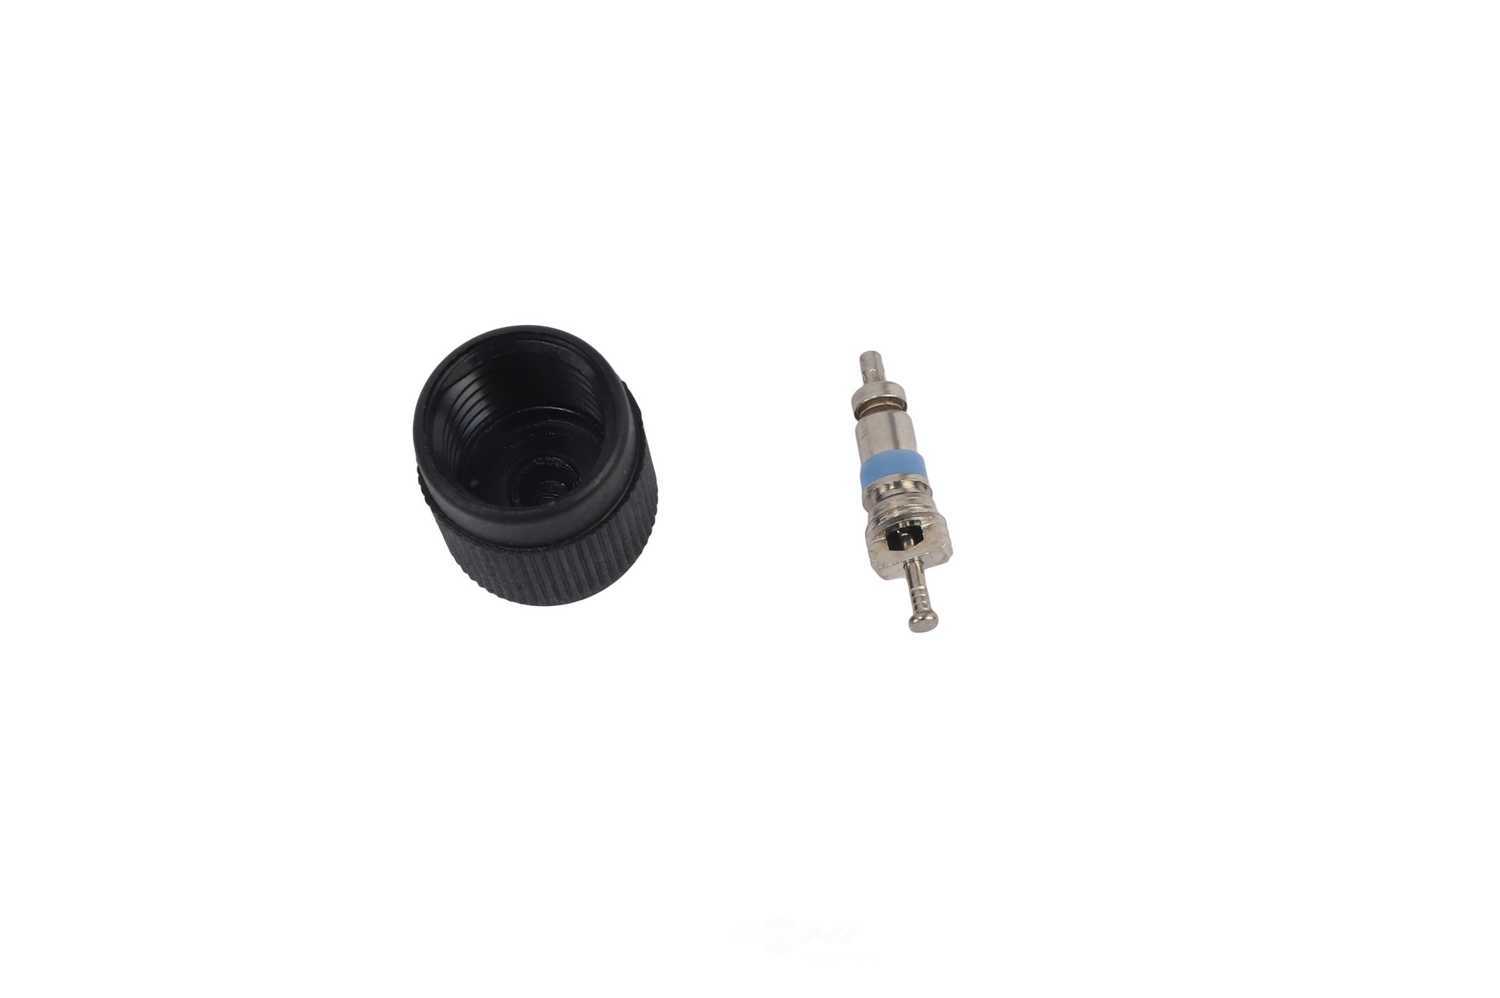 GM GENUINE PARTS CANADA - Fuel Injection Fuel Pressure Service Kit - GMC 12570619